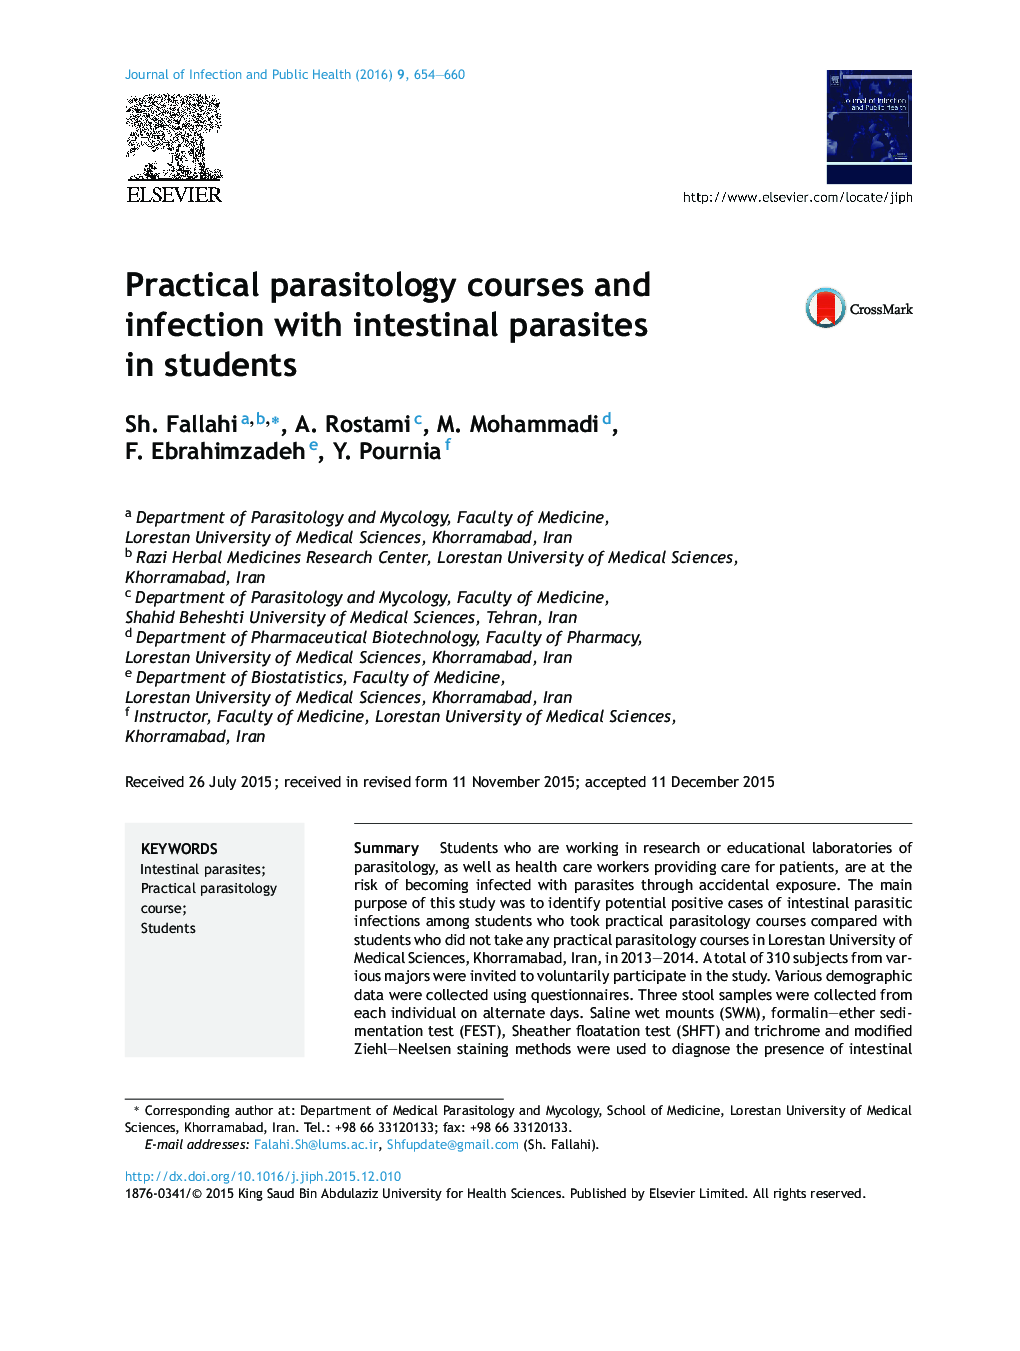 Practical parasitology courses and infection with intestinal parasites in students